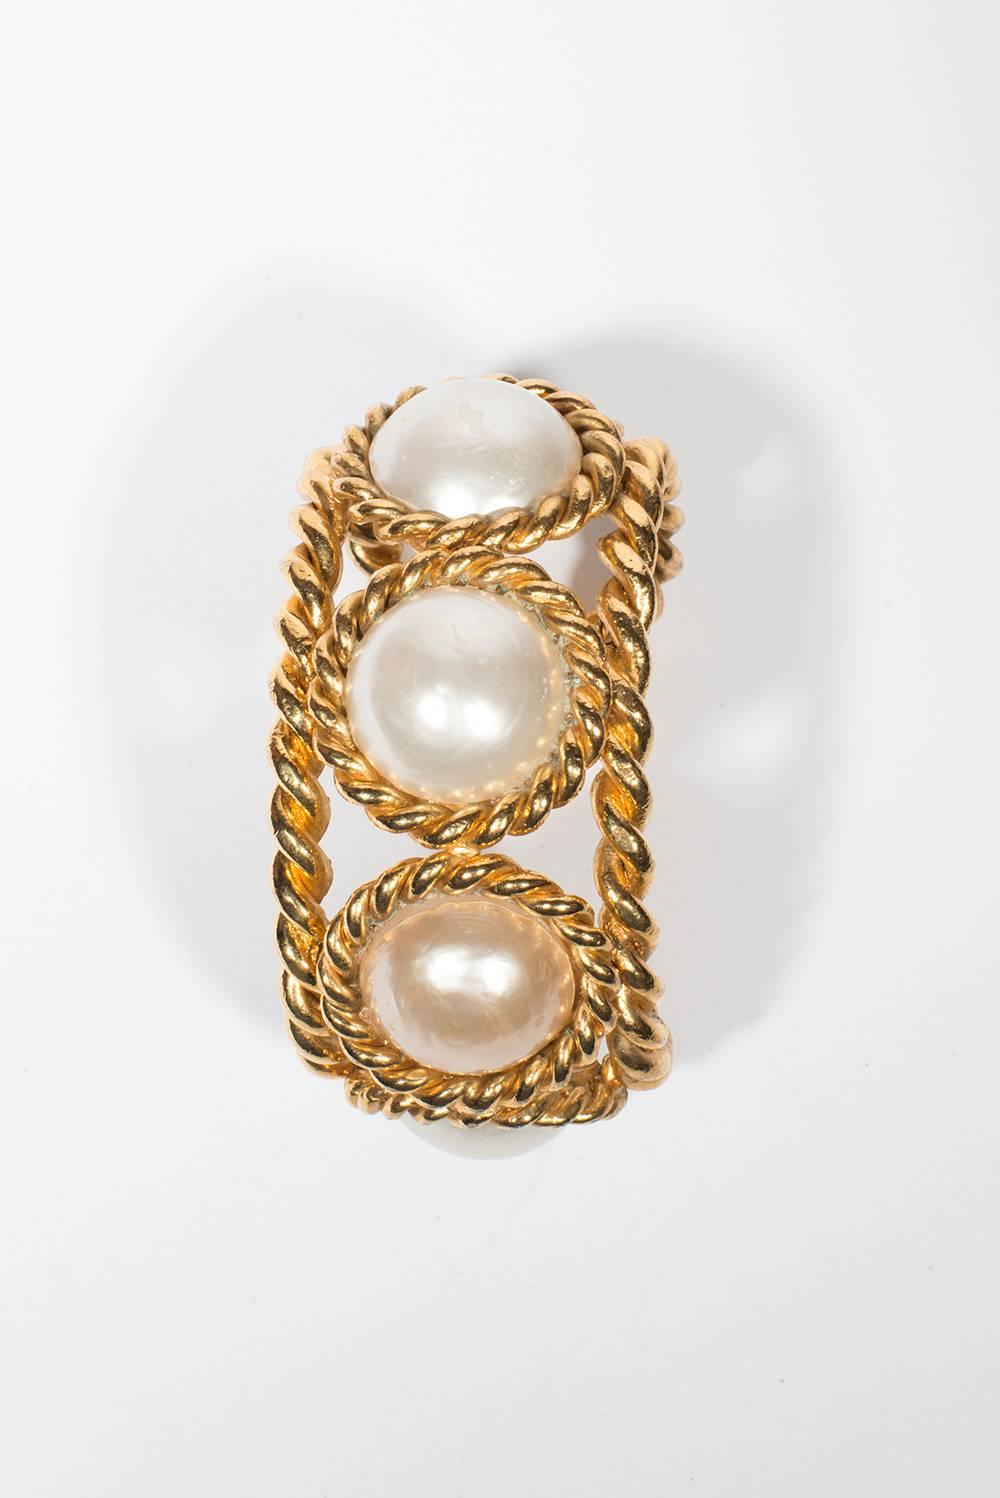 Divine 2006 Chanel  Vintage  Faux Pearl Cuff 
Extraordinary cuff  gold metal with 5 faux pearls of 2,2 cm diameter. 